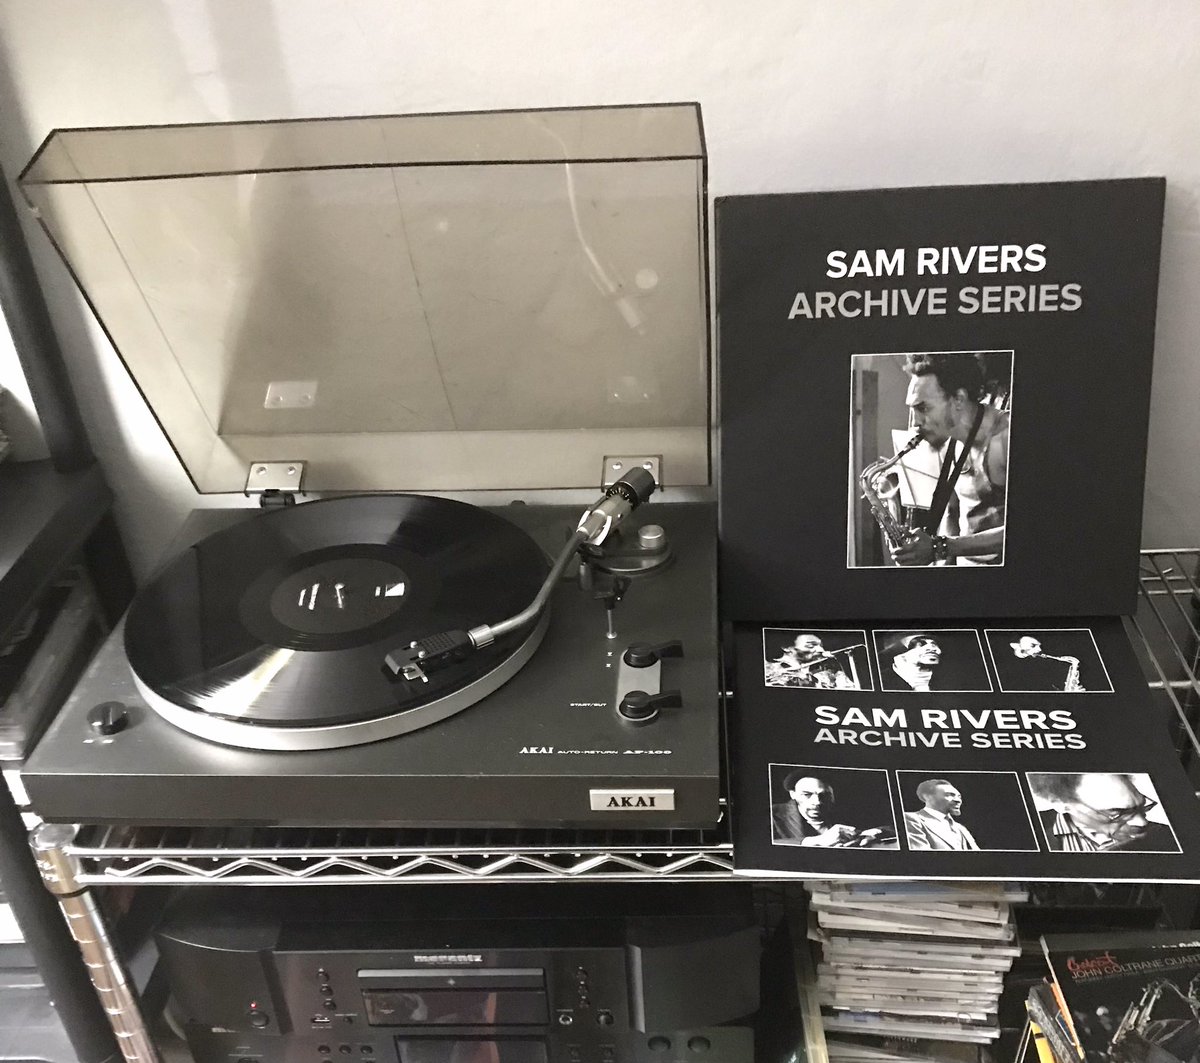 #NowPIaying #Jazz #SamRivers #vinylcollection #bestmusic2023 

Sam Rivers - Archive Series (5 x Vinyl Limited Edition - NoBusiness, 2023)